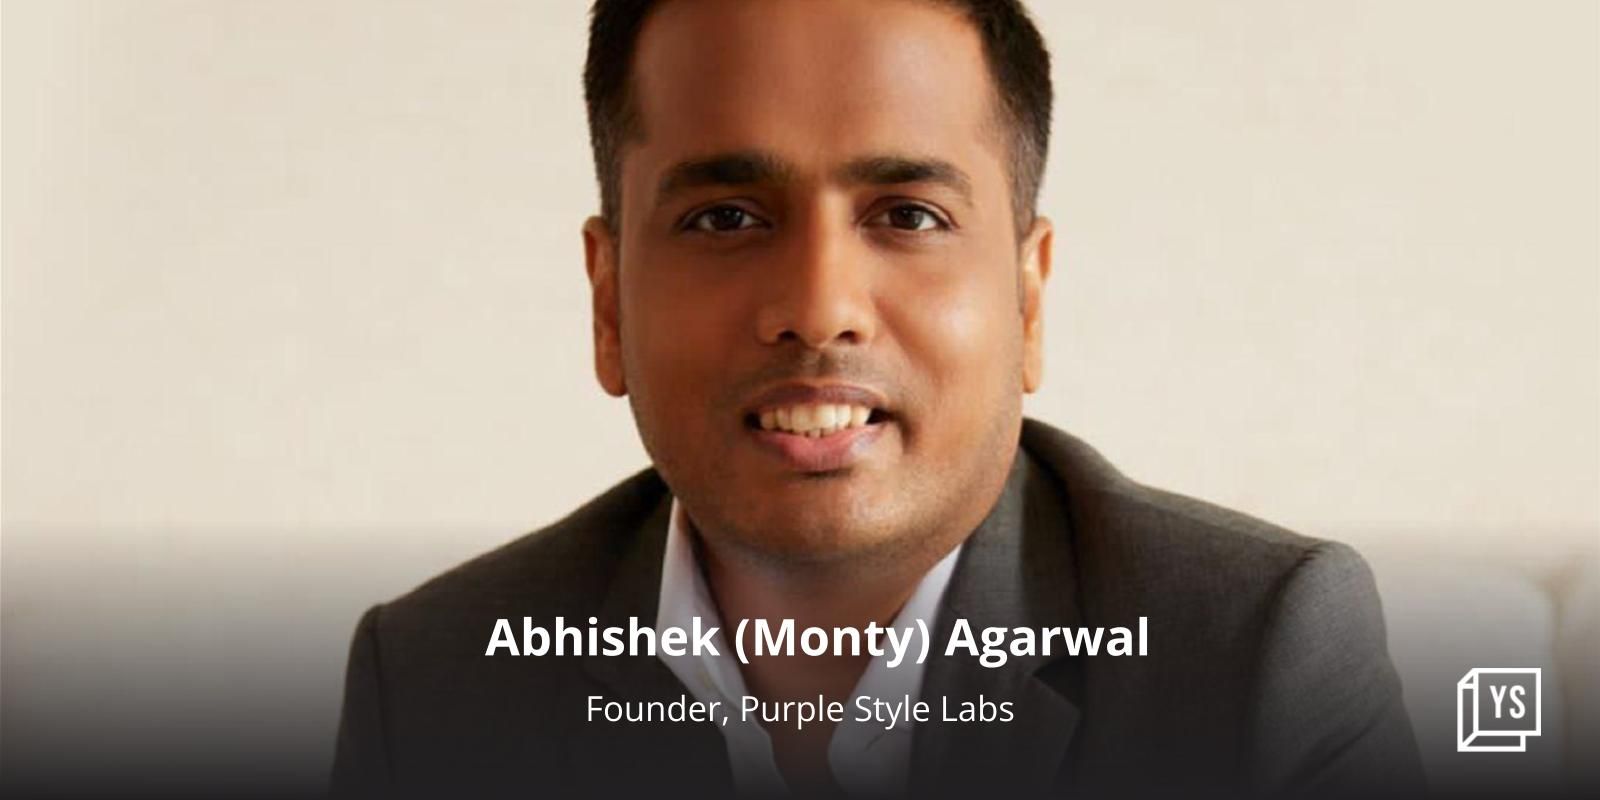 Purple Style Labs raises $8M in Series D funding led by Pidilite Family Office